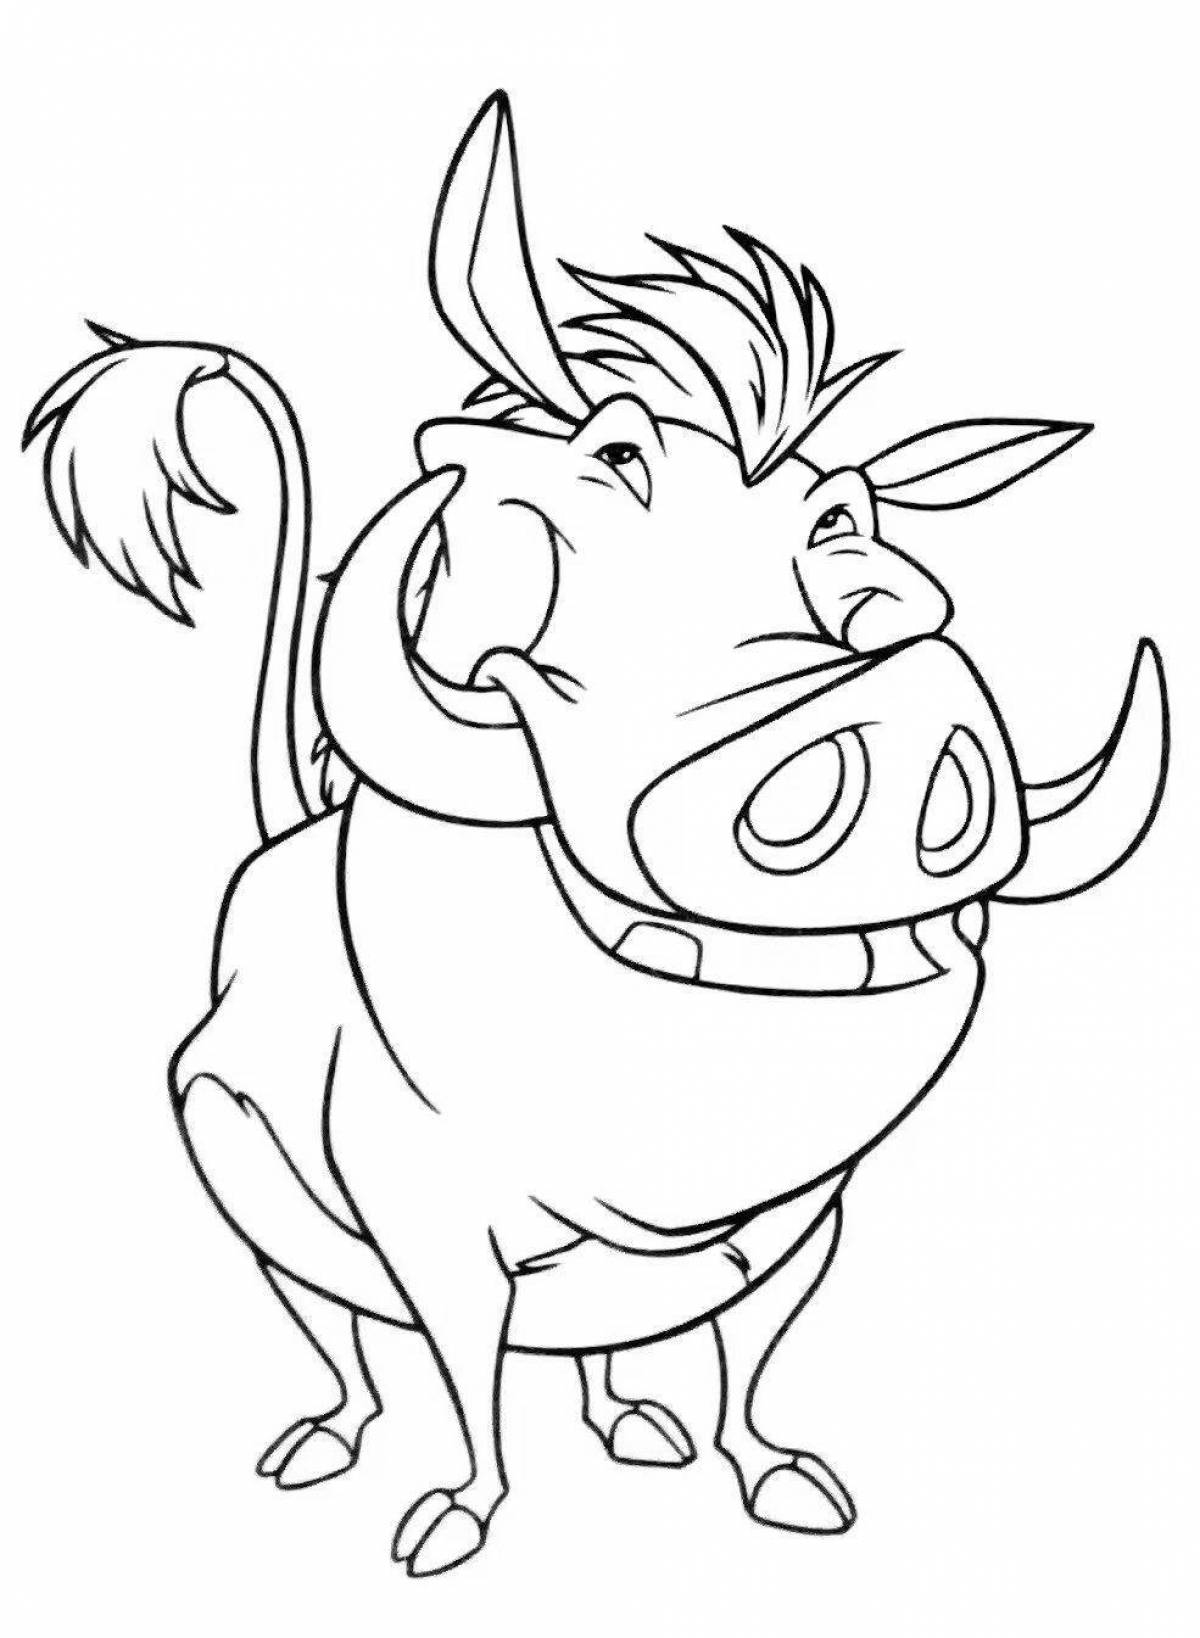 Coloring page dazzling pumbaa